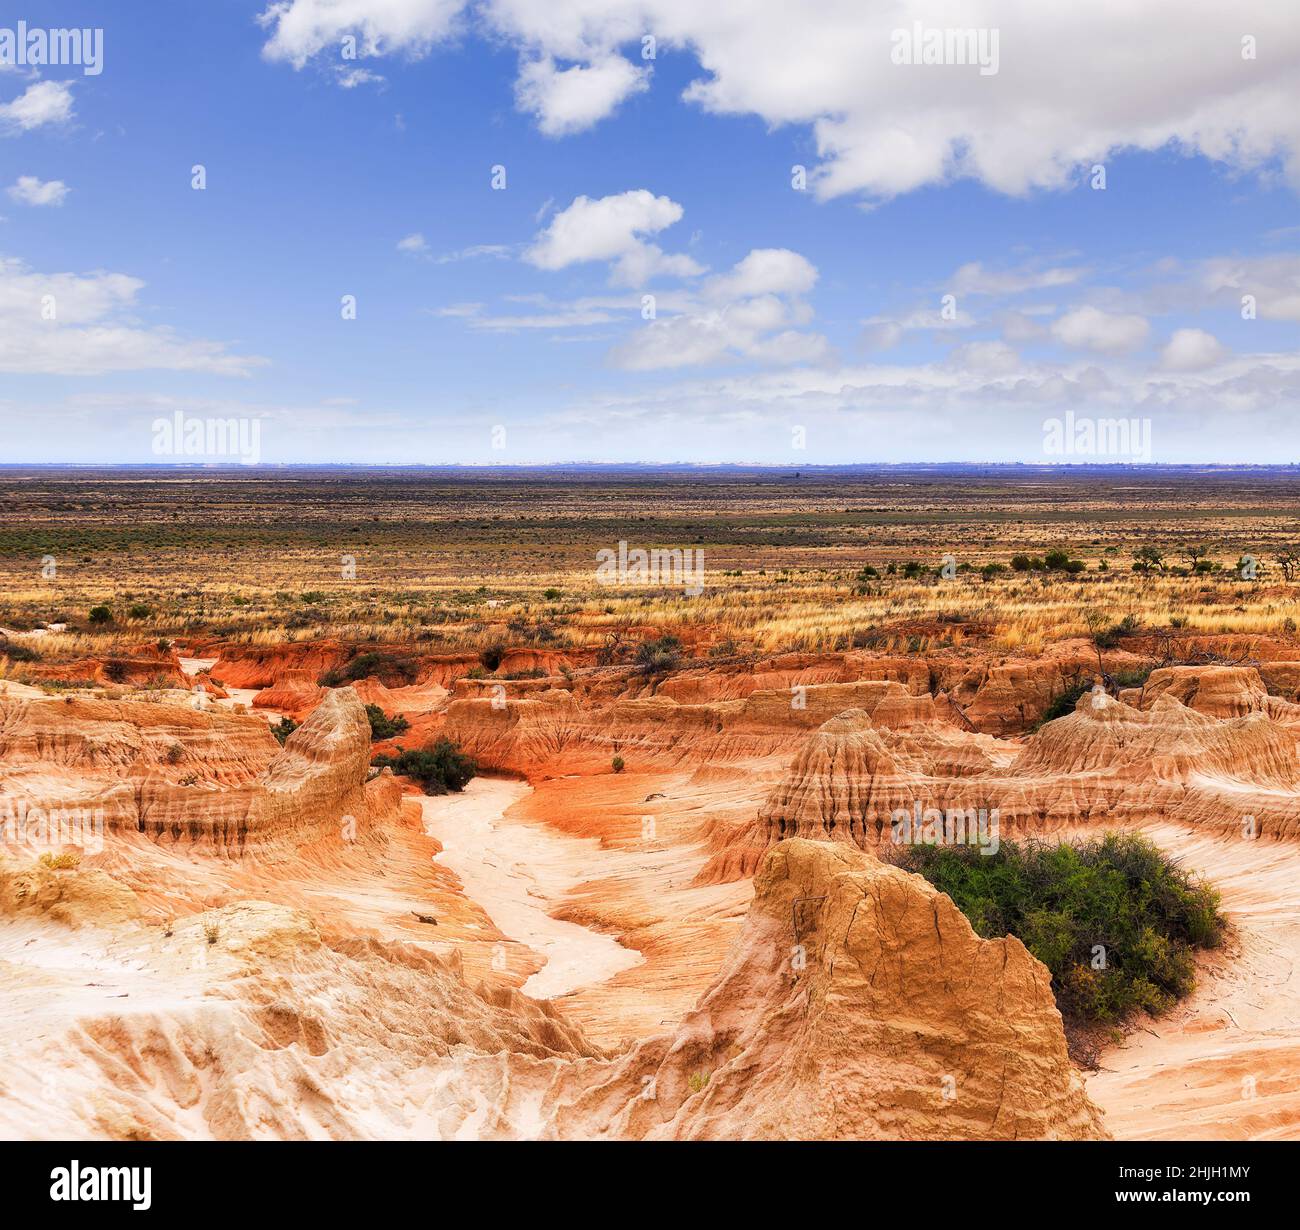 Plain of dried lake mungo bed from Walls of China sandstone formations from erosion - landscape. Stock Photo